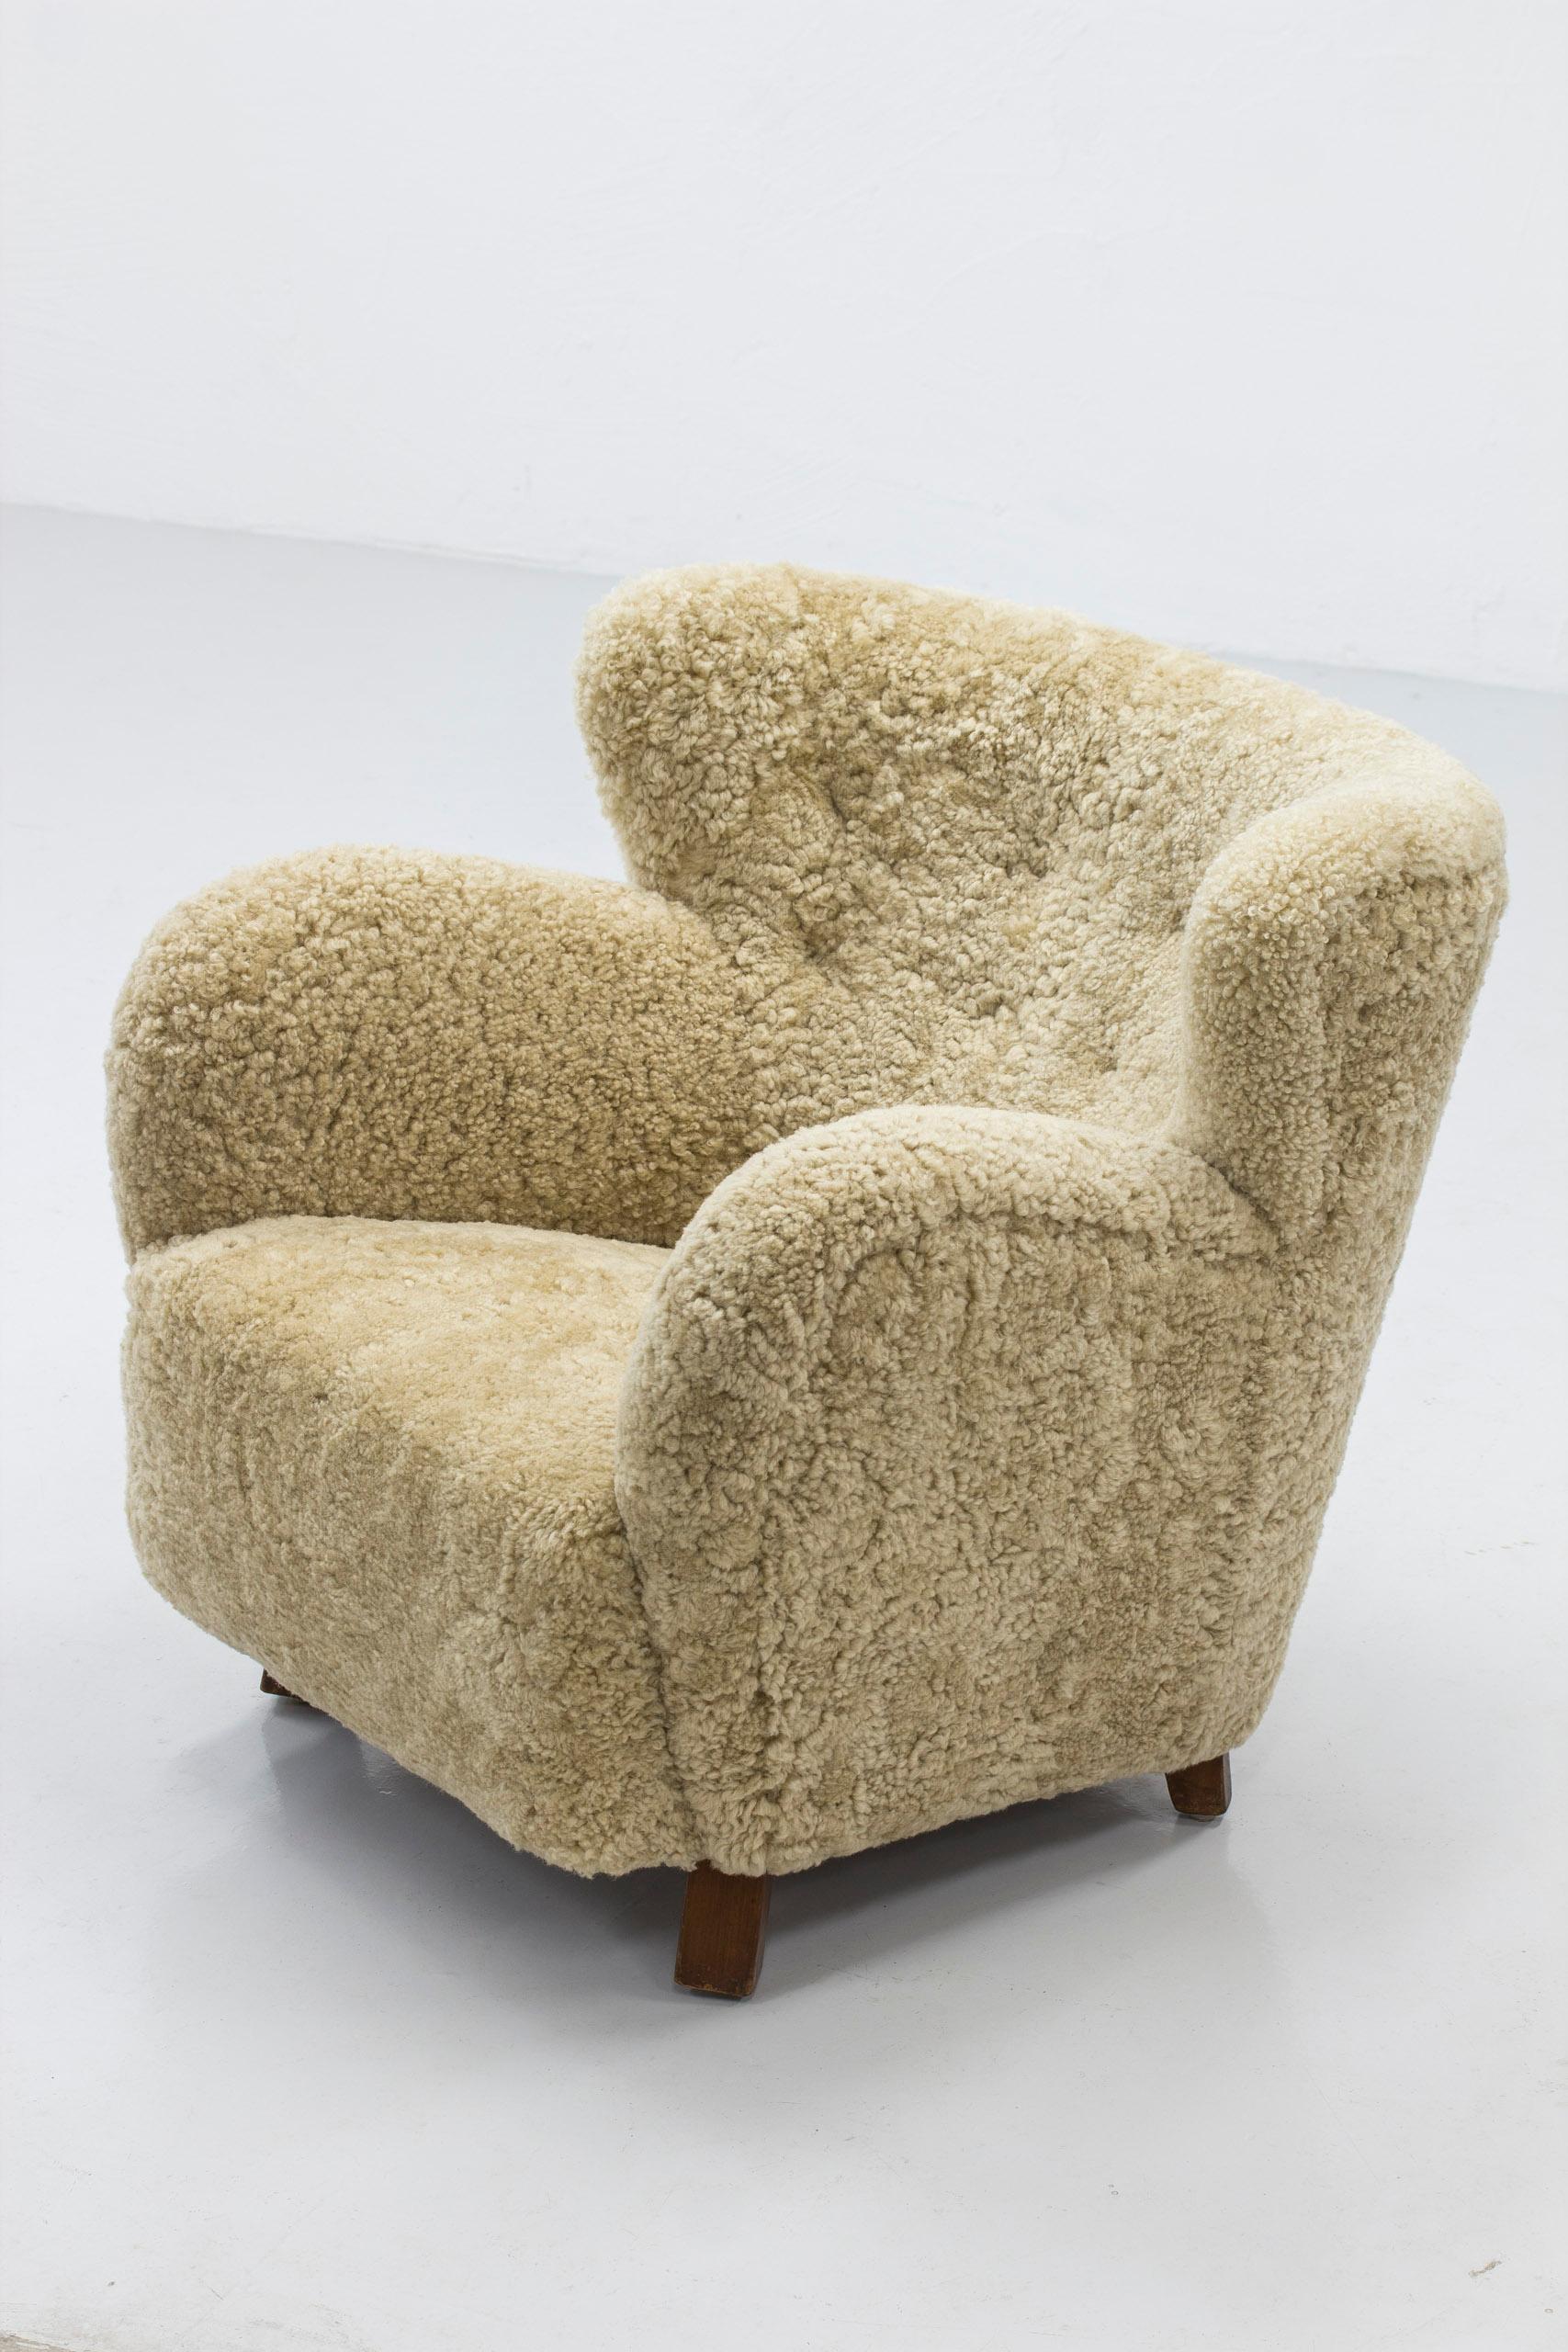 Danish modern low back wing chair made by a Danish craftsman. Excellent quality in shape and production. Low and comfortable design. Legs made from solid maple wood. New upholstery in beige sheep skin of great quality. Very good condition with very